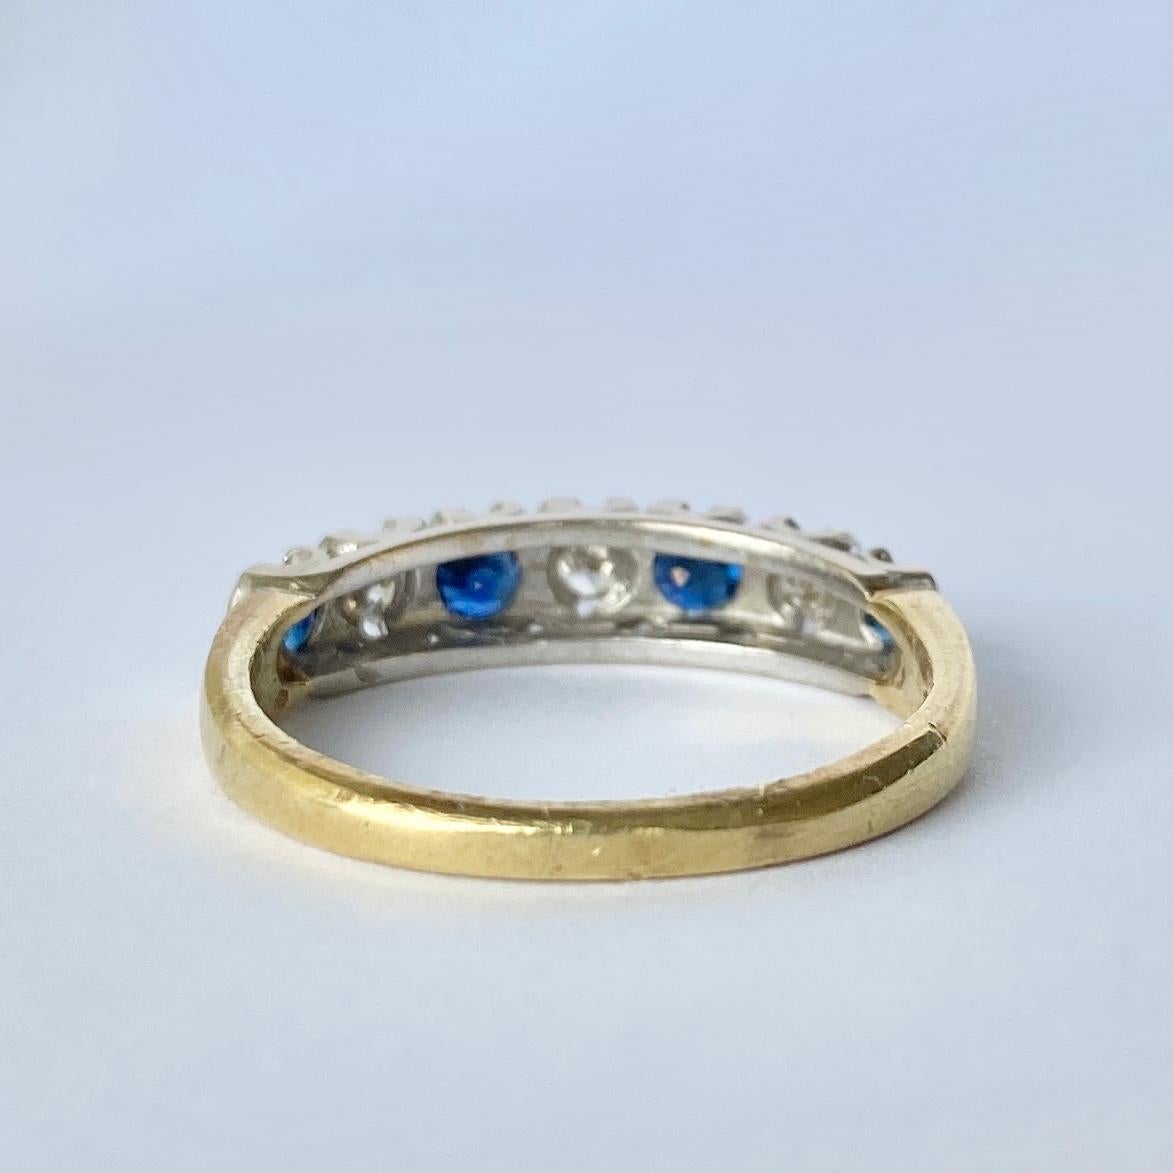 Set within this 18ct gold band there are four deep blue sapphires and three sparkling diamonds. The sapphires total 40pts and the diamond total is 30pts. Fully hallmarked London 1978.

Ring Size: P or 7 3/4 
Band Width: 5mm

Weight: 3.6g 